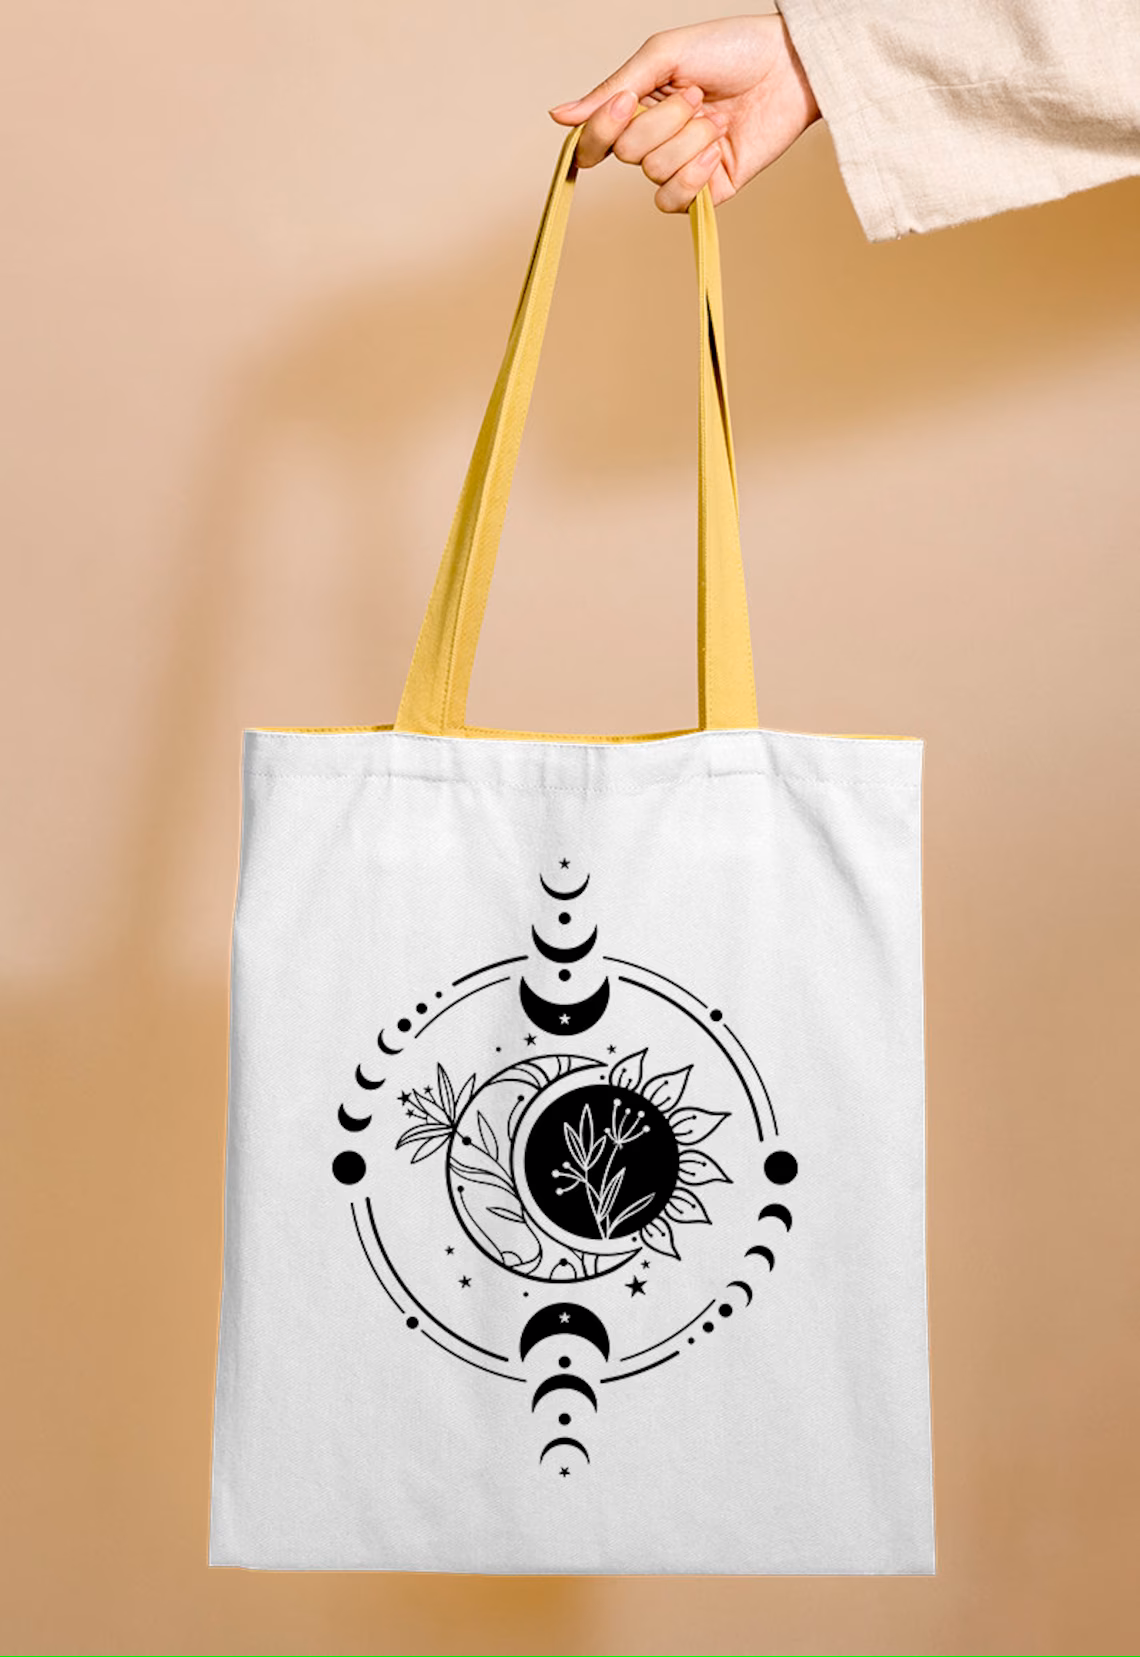 A wonderful print is used on the bag.